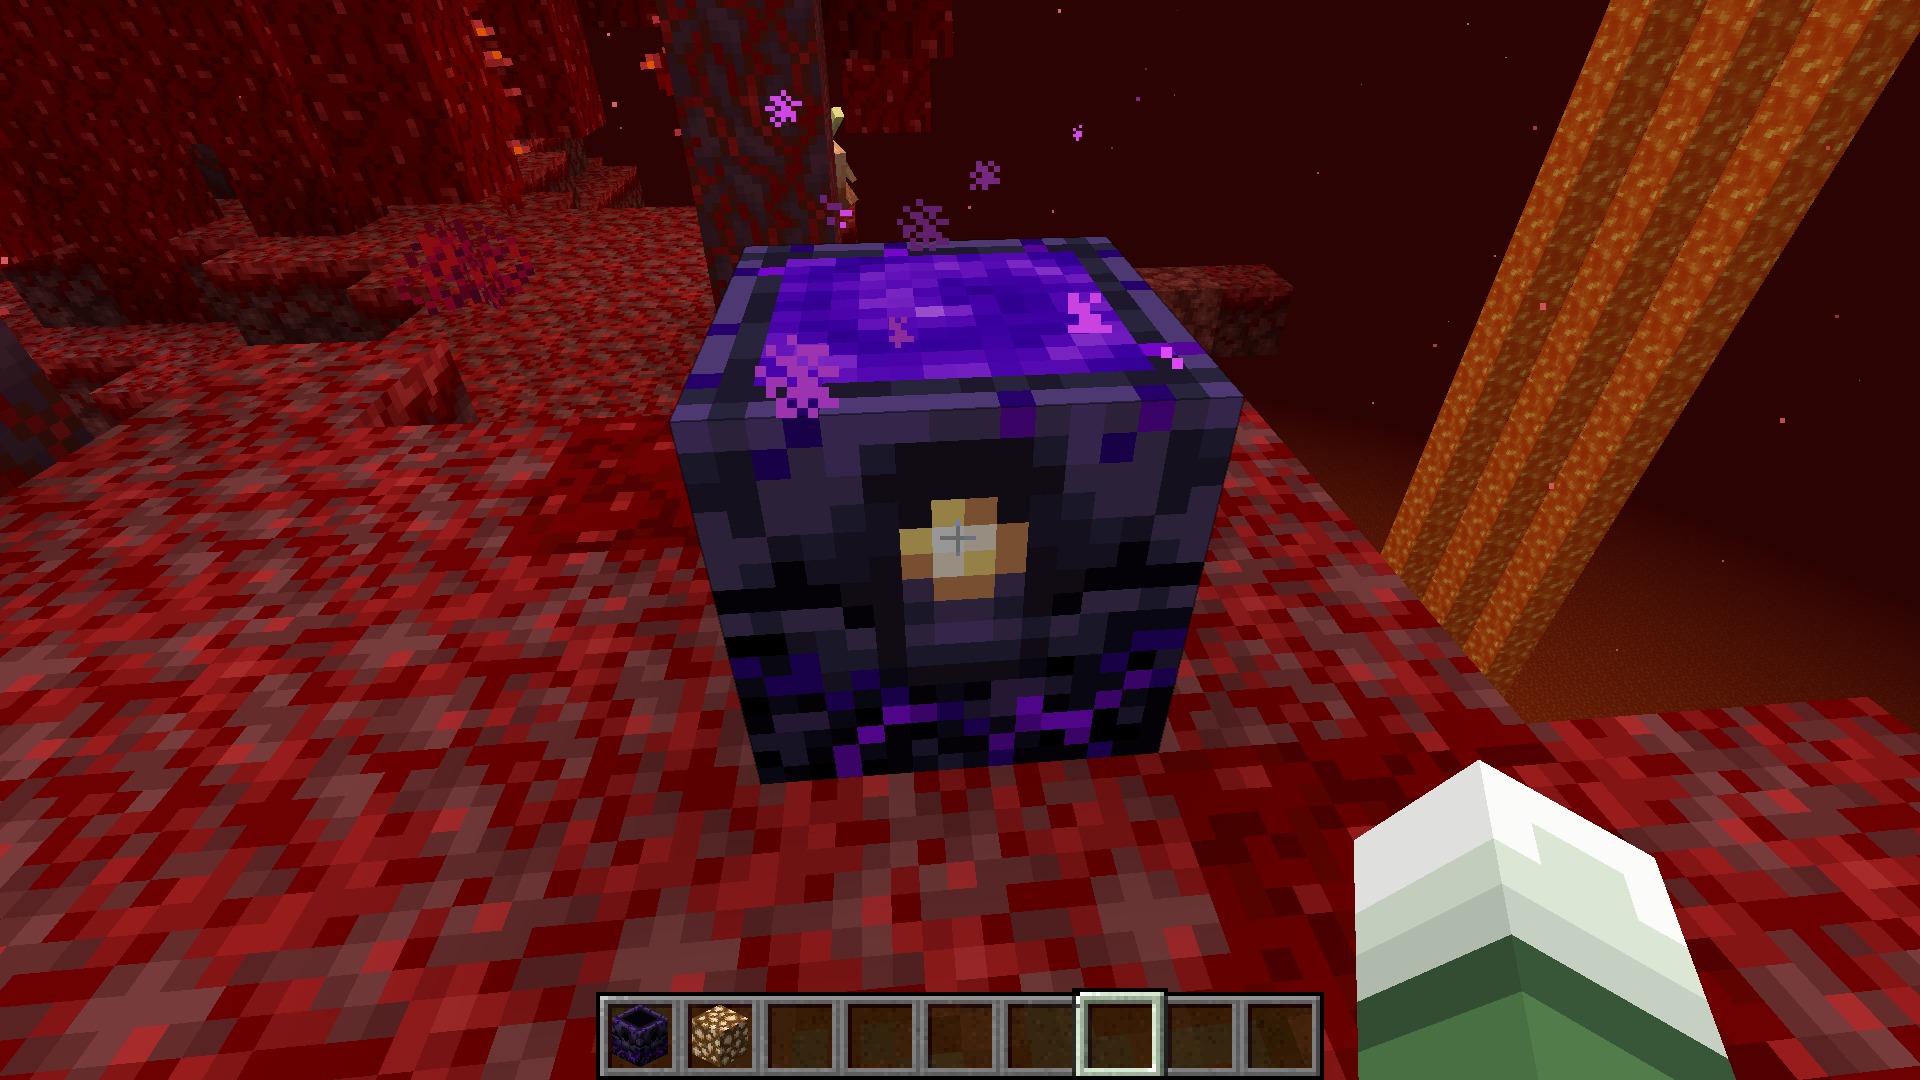 Minecraft Nether Update Explored: The Respawn Anchor, A Way To Respawn In The Nether?